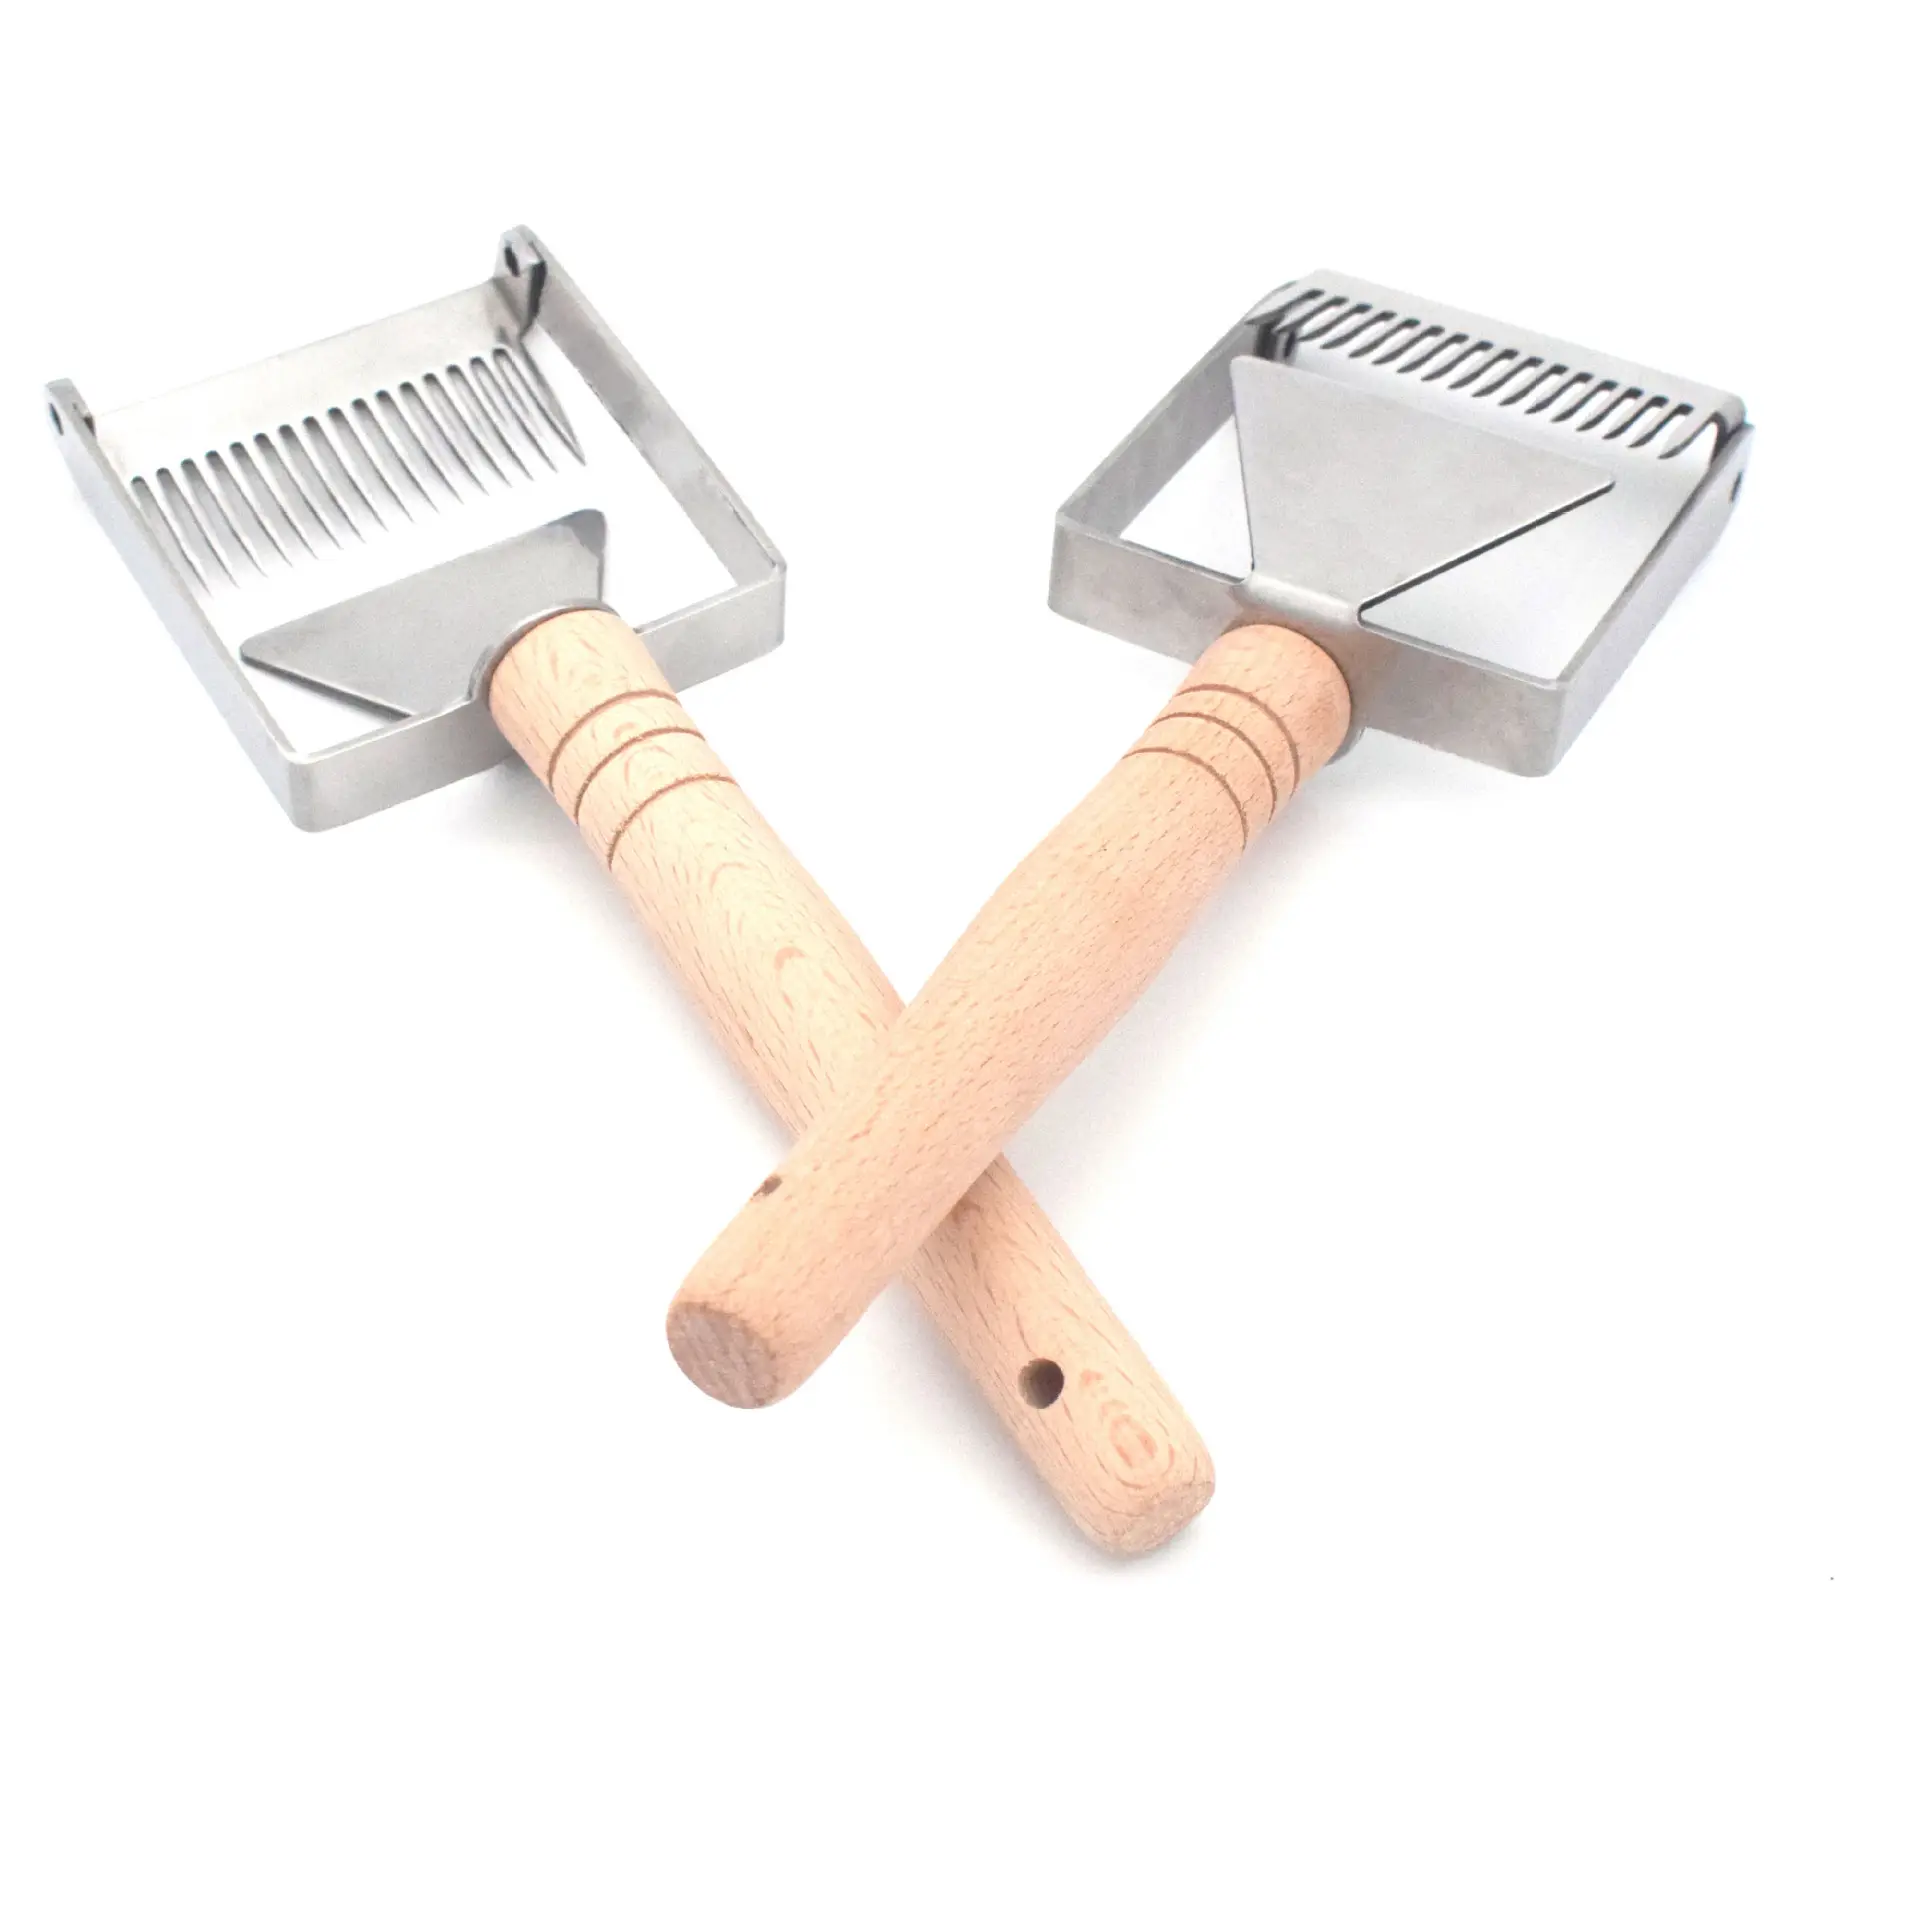 2019 Uncapping Honey Fork New Type Scraper For Beekeeping Apiculture Farm To ols